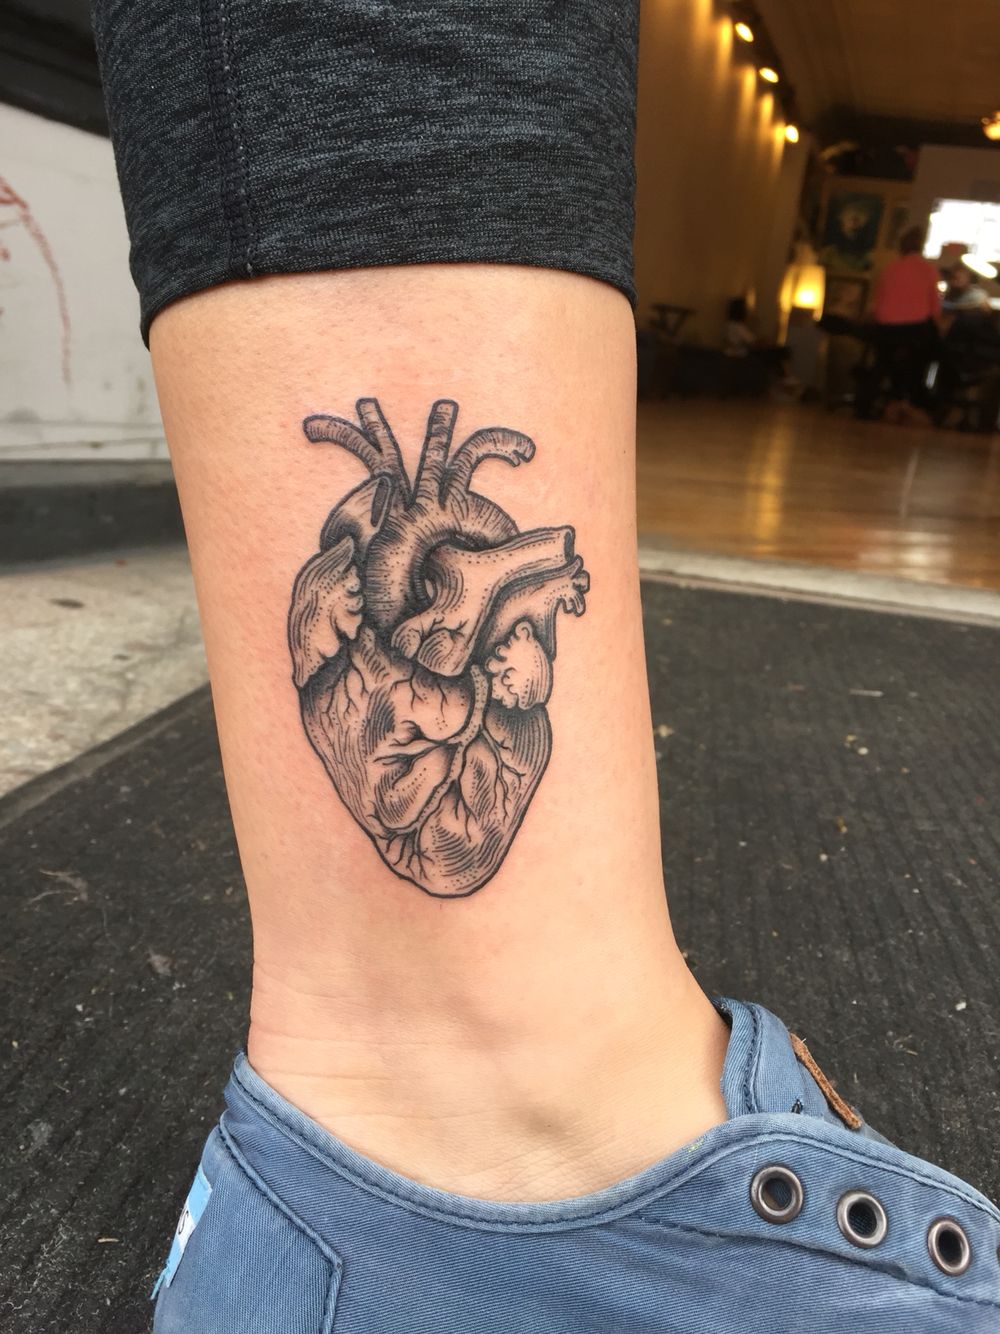 Anatomical Heart Tattoo Designs For Guys With Meaning (67)